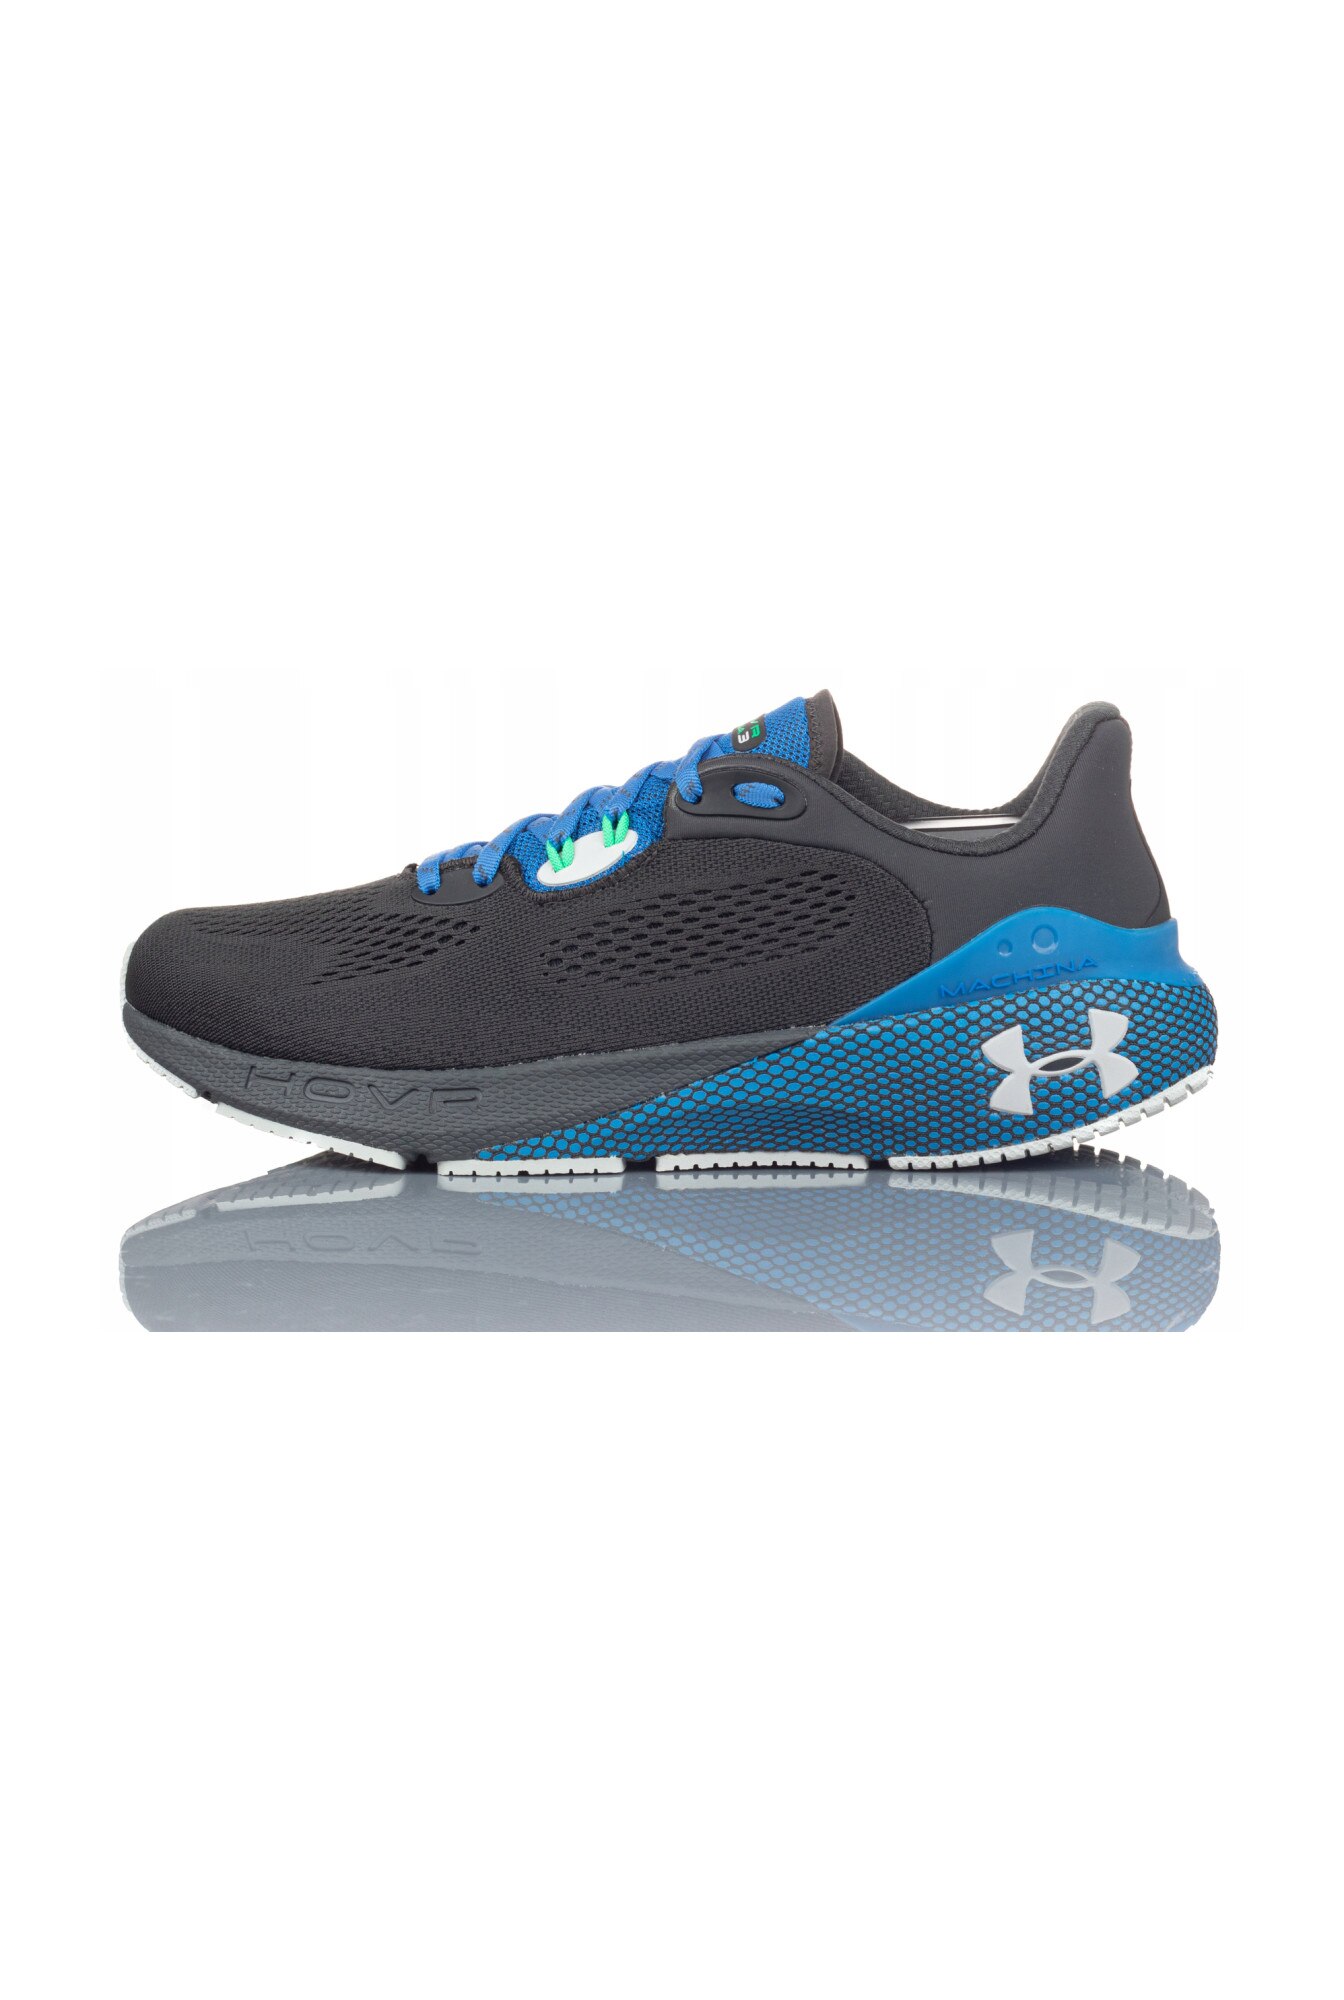 Chaussures UNDER ARMOUR Ua Hovr Machina 2 Clrshift 3024740-002 Blk Red